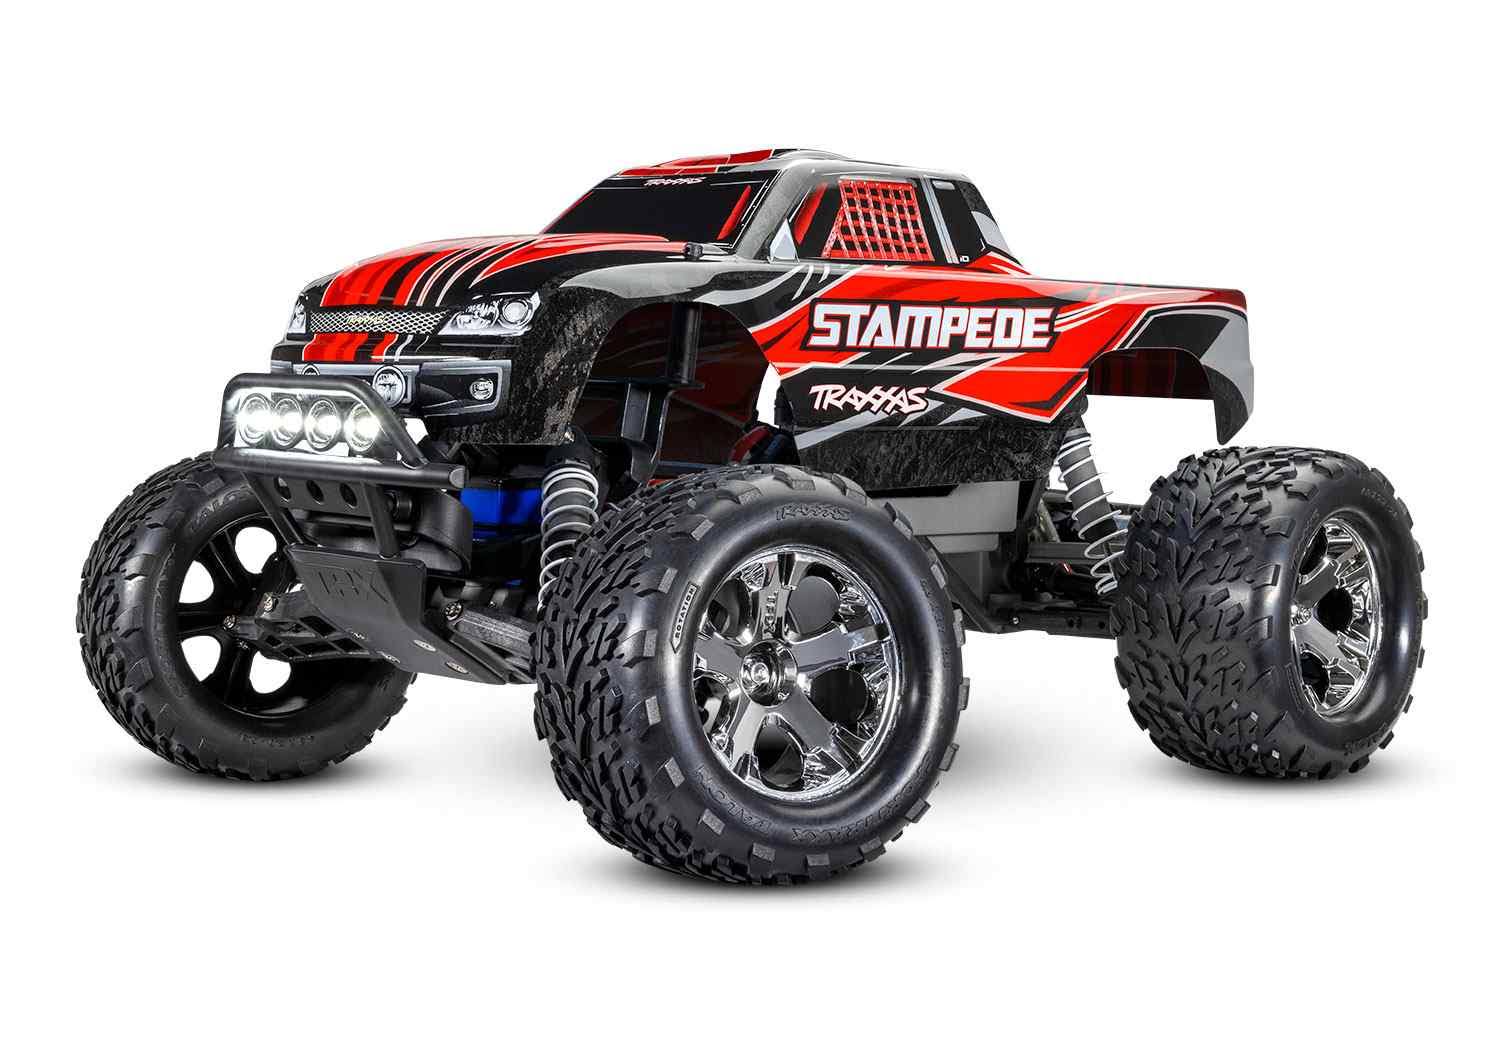 Traxxas 1/10 Stampede 2WD Monster Truck RTR with LED Lights